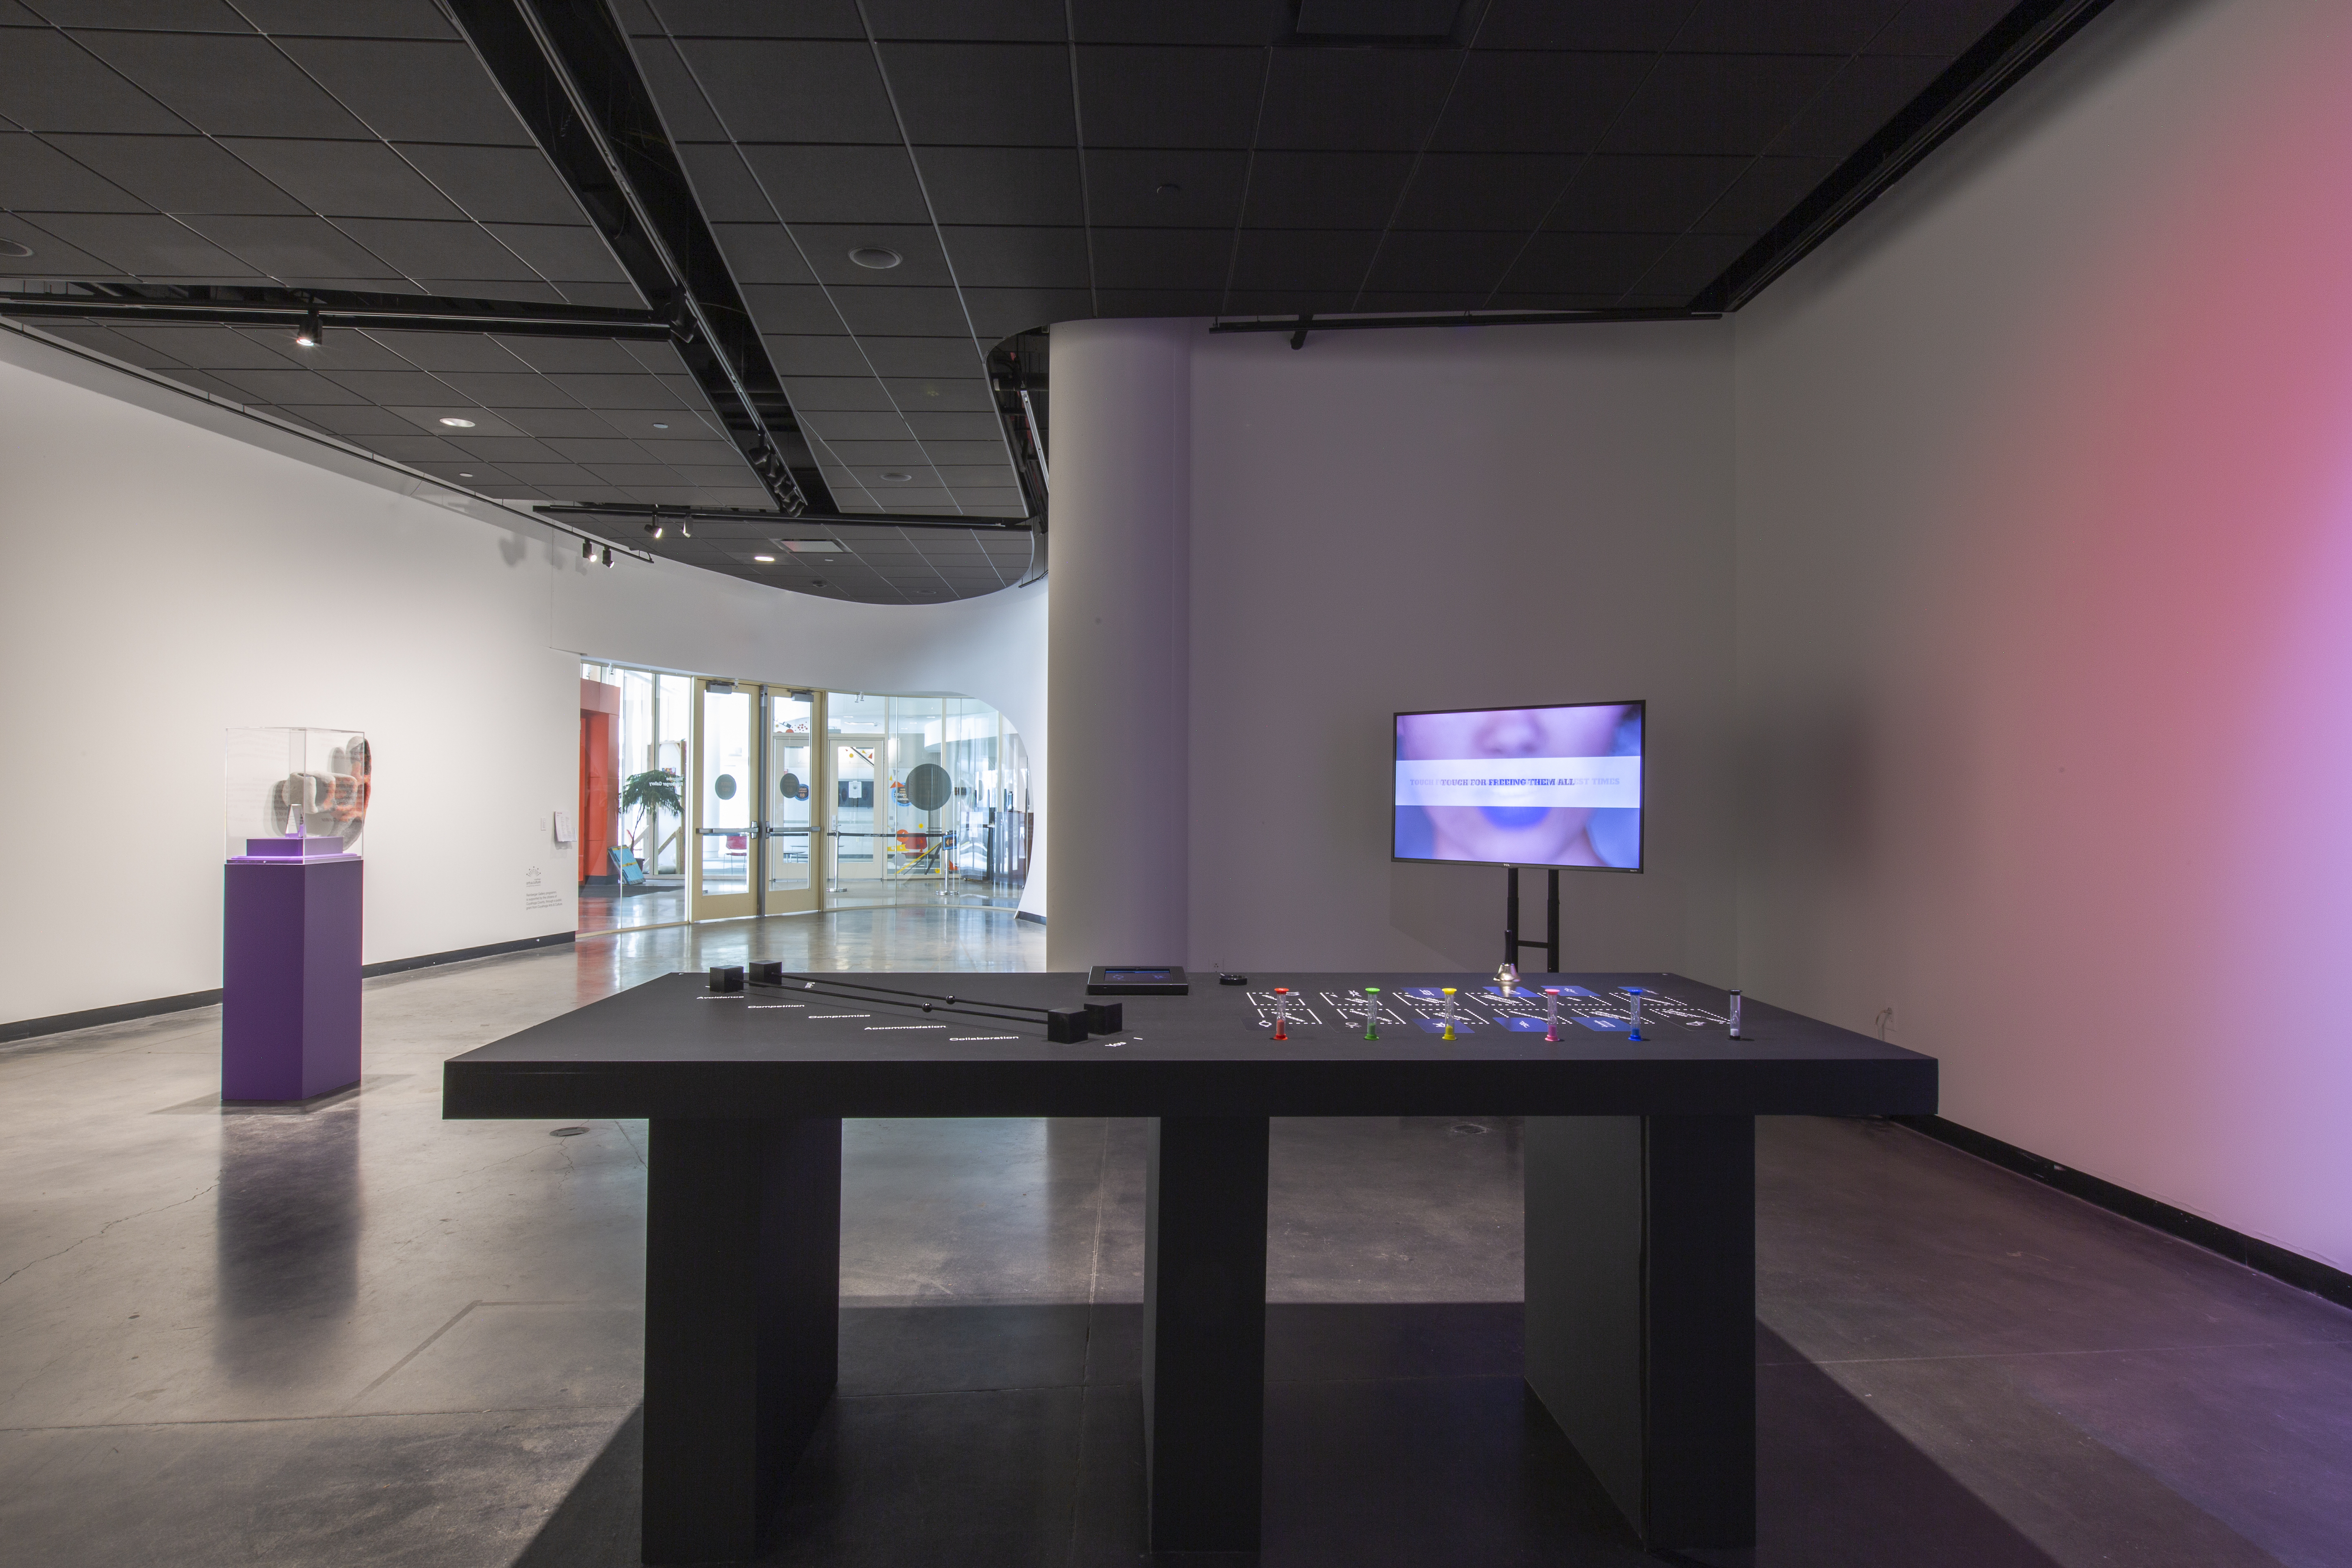 Exhibition view of TITLE TBD, a group exhibition featuring work by ⚙️️Admin, Adult Kindergarten, Thomas Barger, Lukaza Branfman-Verissimo, GenderFail, Jeff Kasper, Ariane Loze, Natalia Nakazawa, Emily Mae Smith and presented at The Cleveland Institute of Art's Reinberger Gallery.